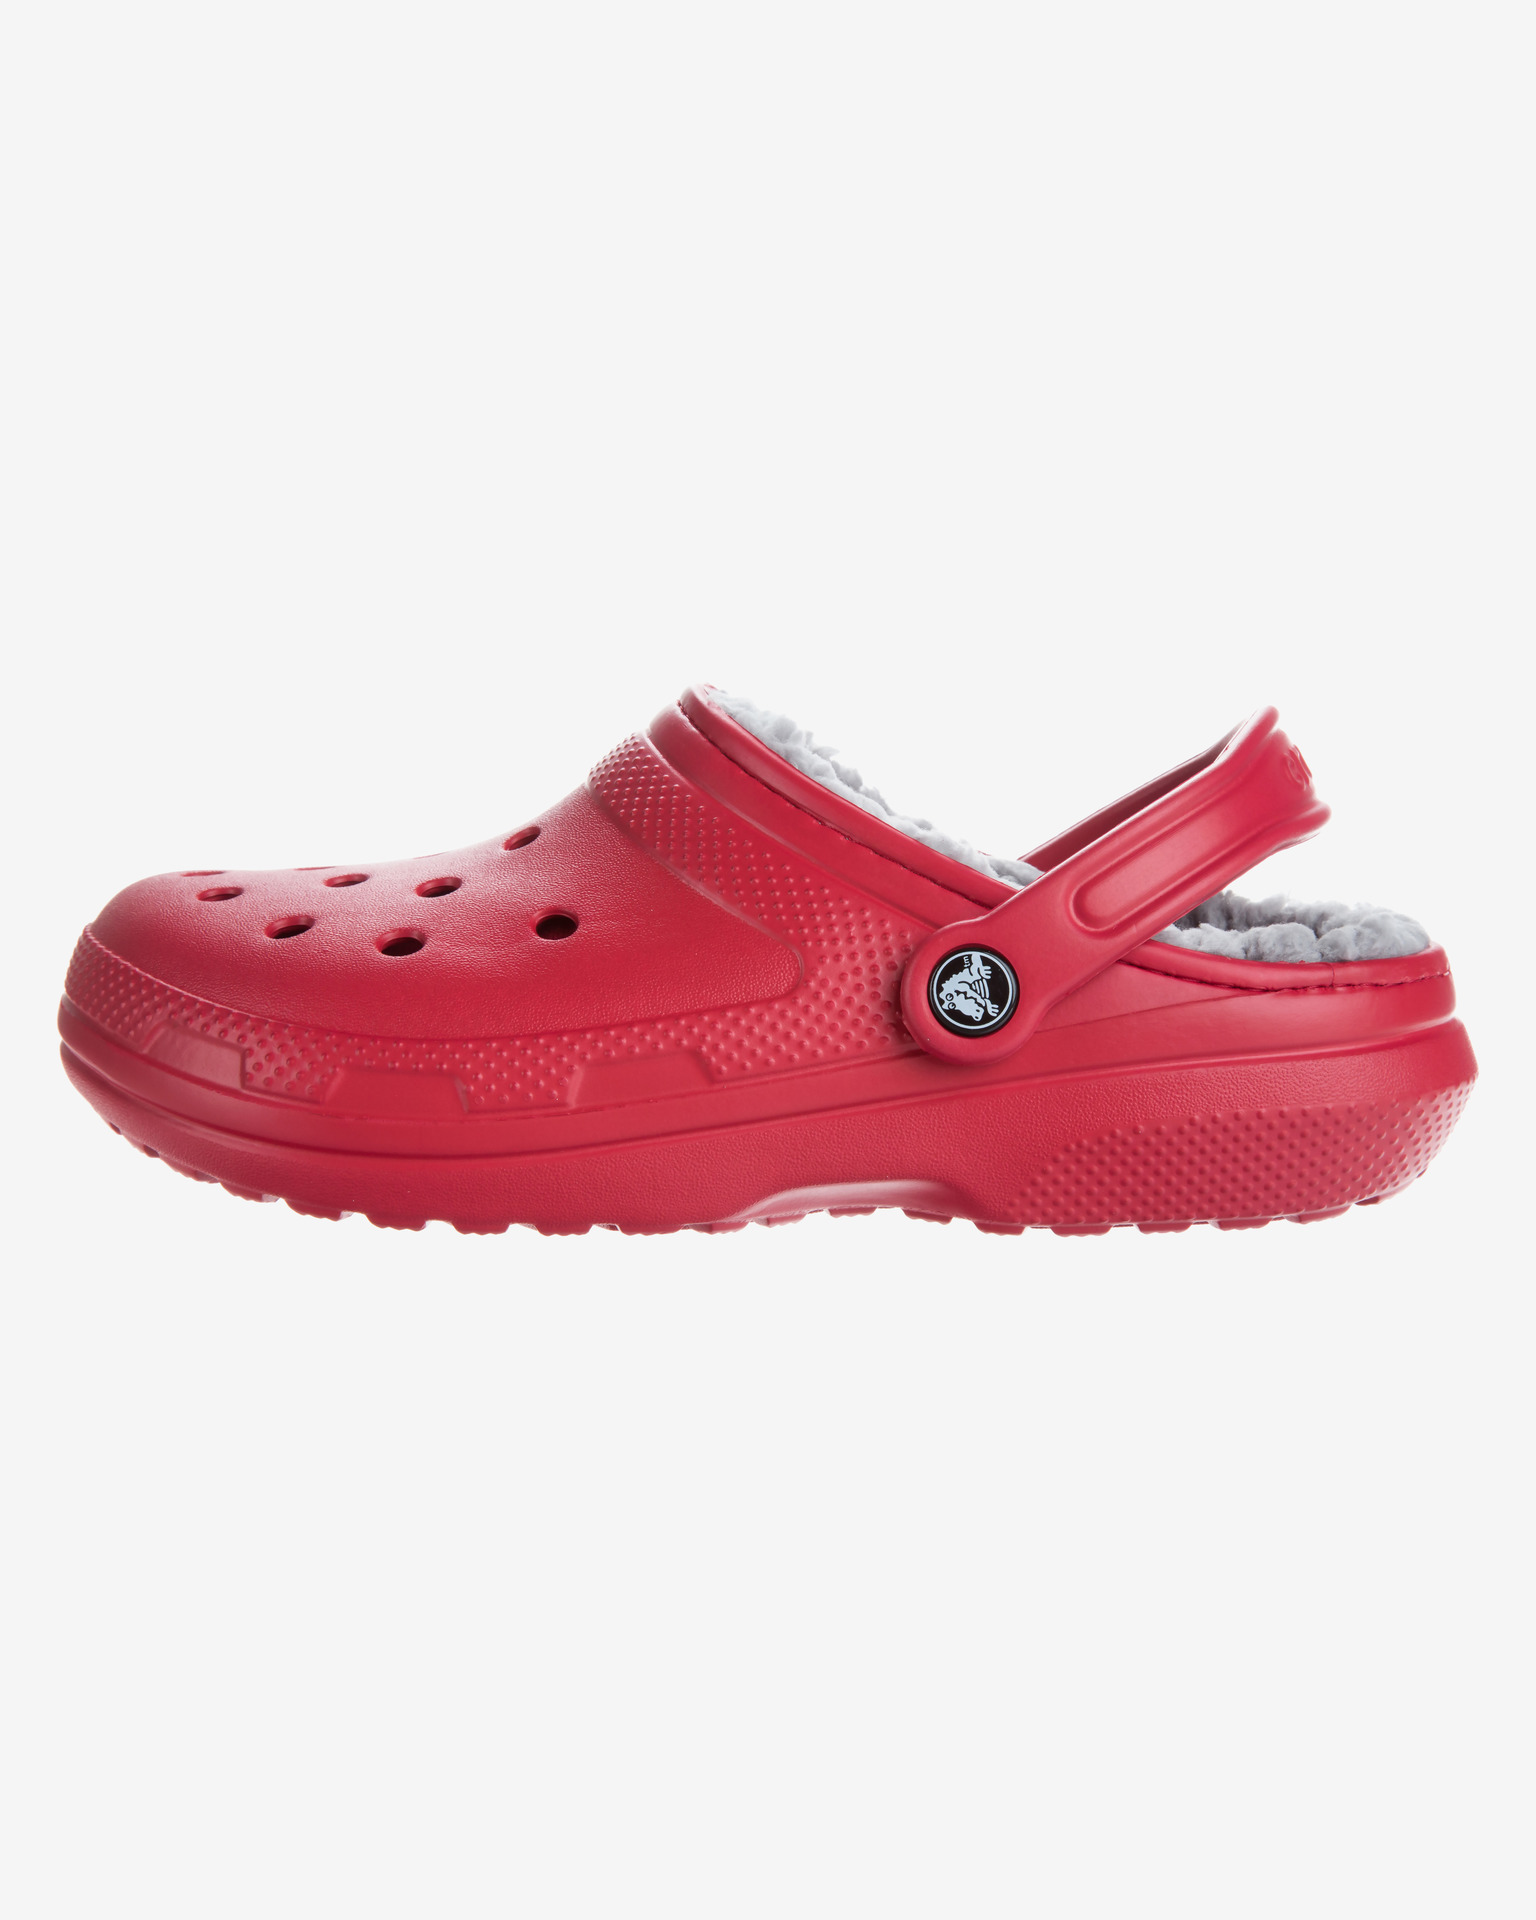 red lined crocs